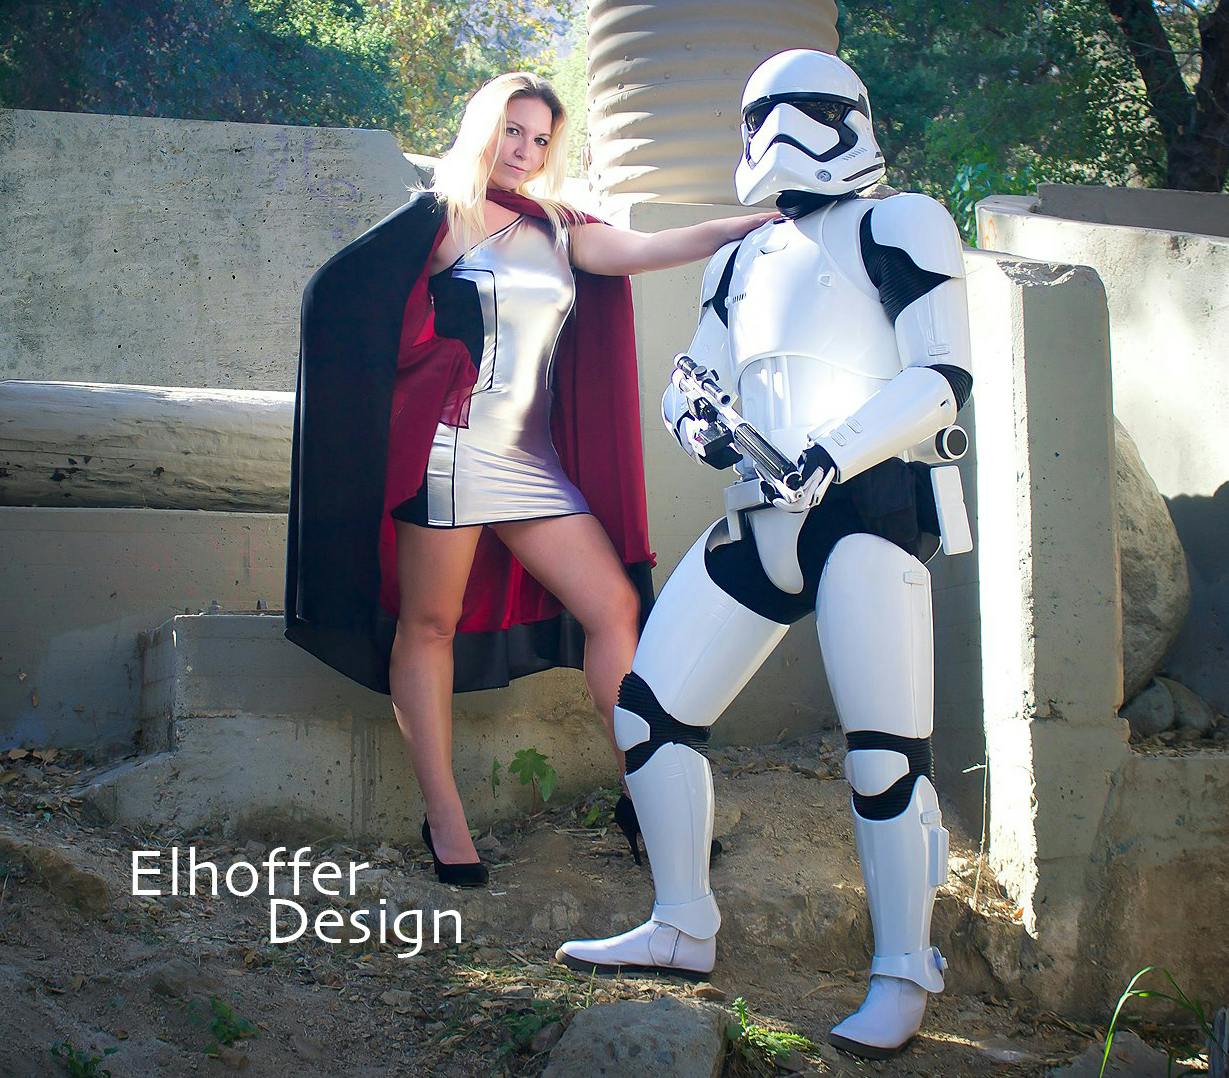 "My girlfriend who inspired the collection is photo'd with her boyfriend, who was one of the first people to build the First Order armor, which is so incredibly cool. It was so much fun walking through the park with a stormtrooper next to us!" Elhoffer said.